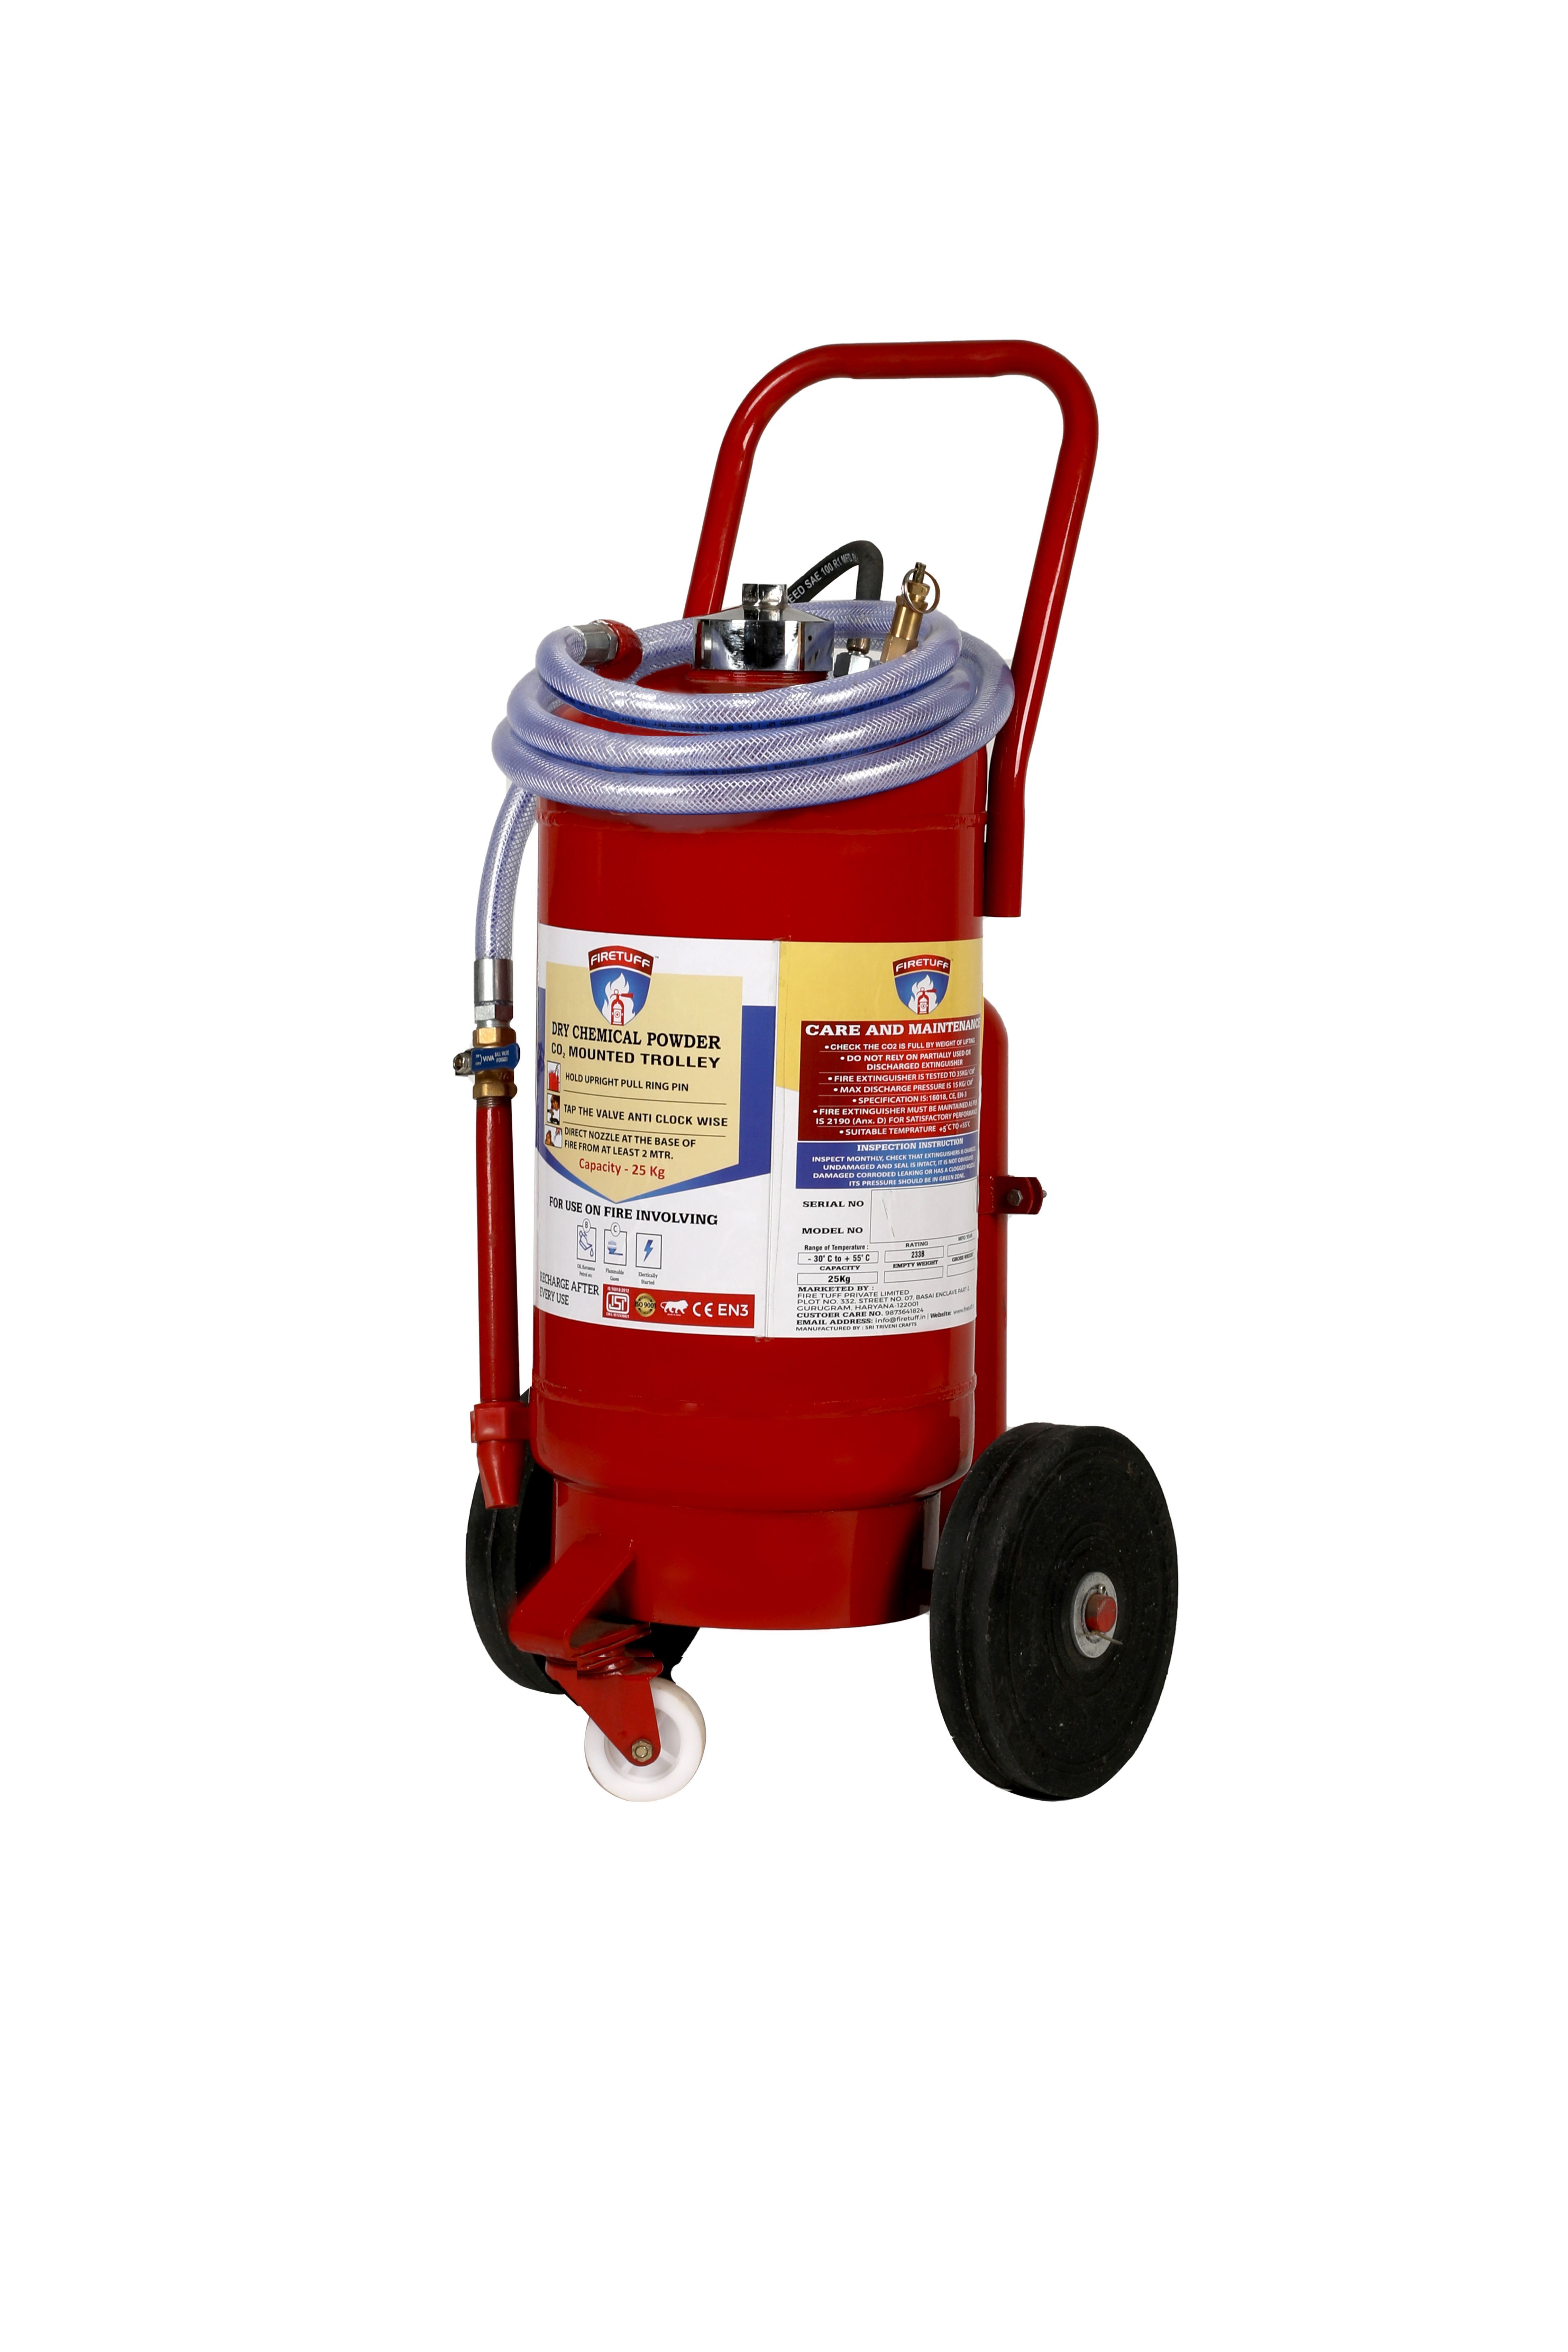 Trolley Mounted ABC (DCP) Type Fire Extinguishers- 25kg